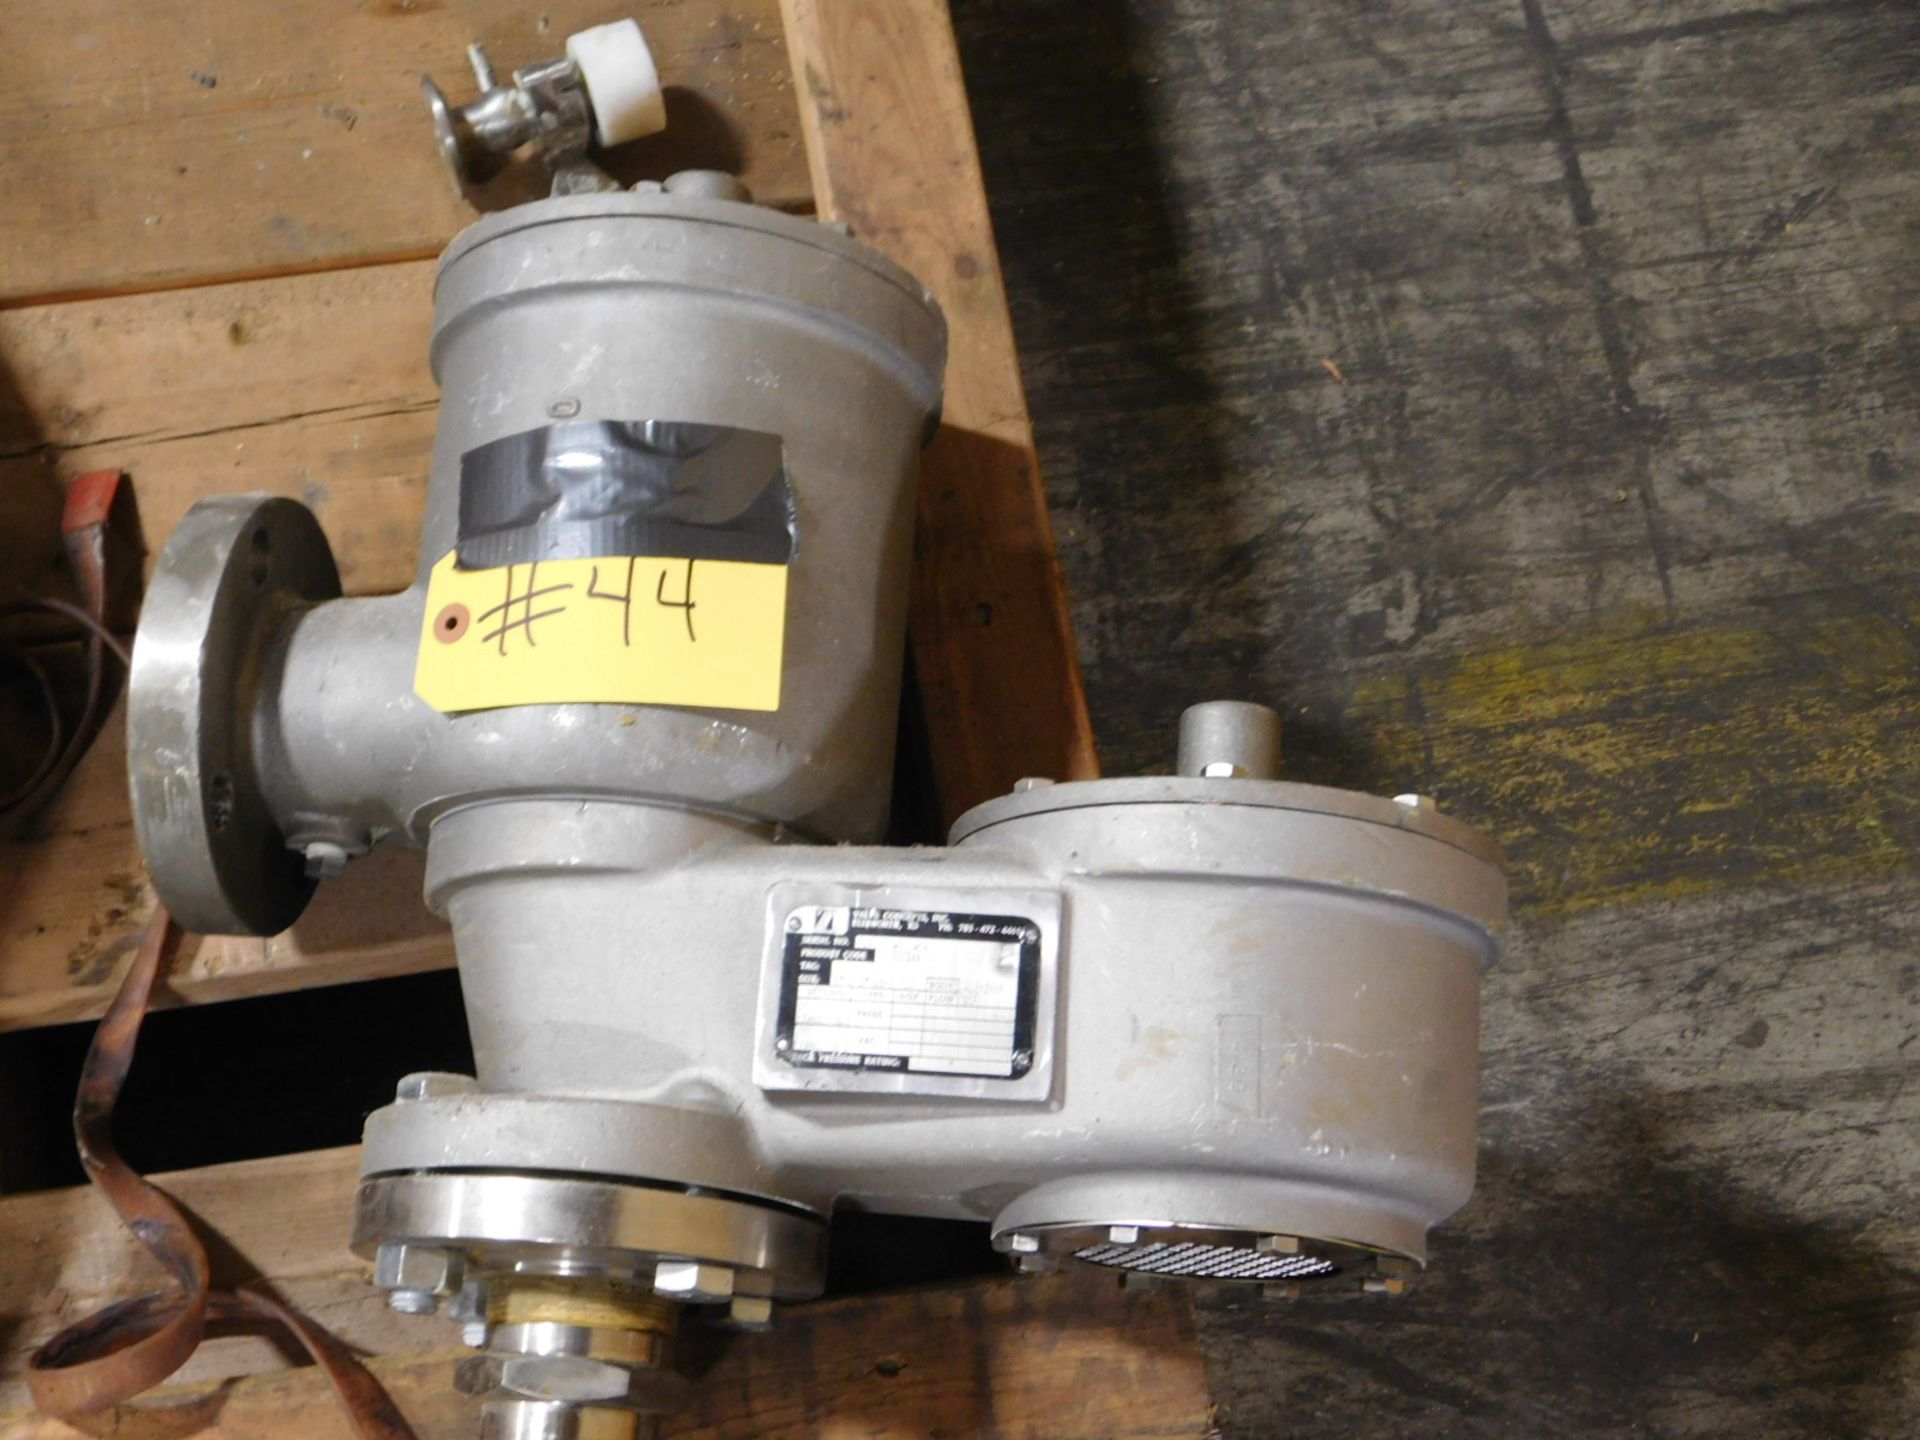 Valve Concepts inc.3222AA,2'x2" ASME FLANGE FLOW SCPH, SN:AE1105-000-09 :equipment located at - Image 4 of 7